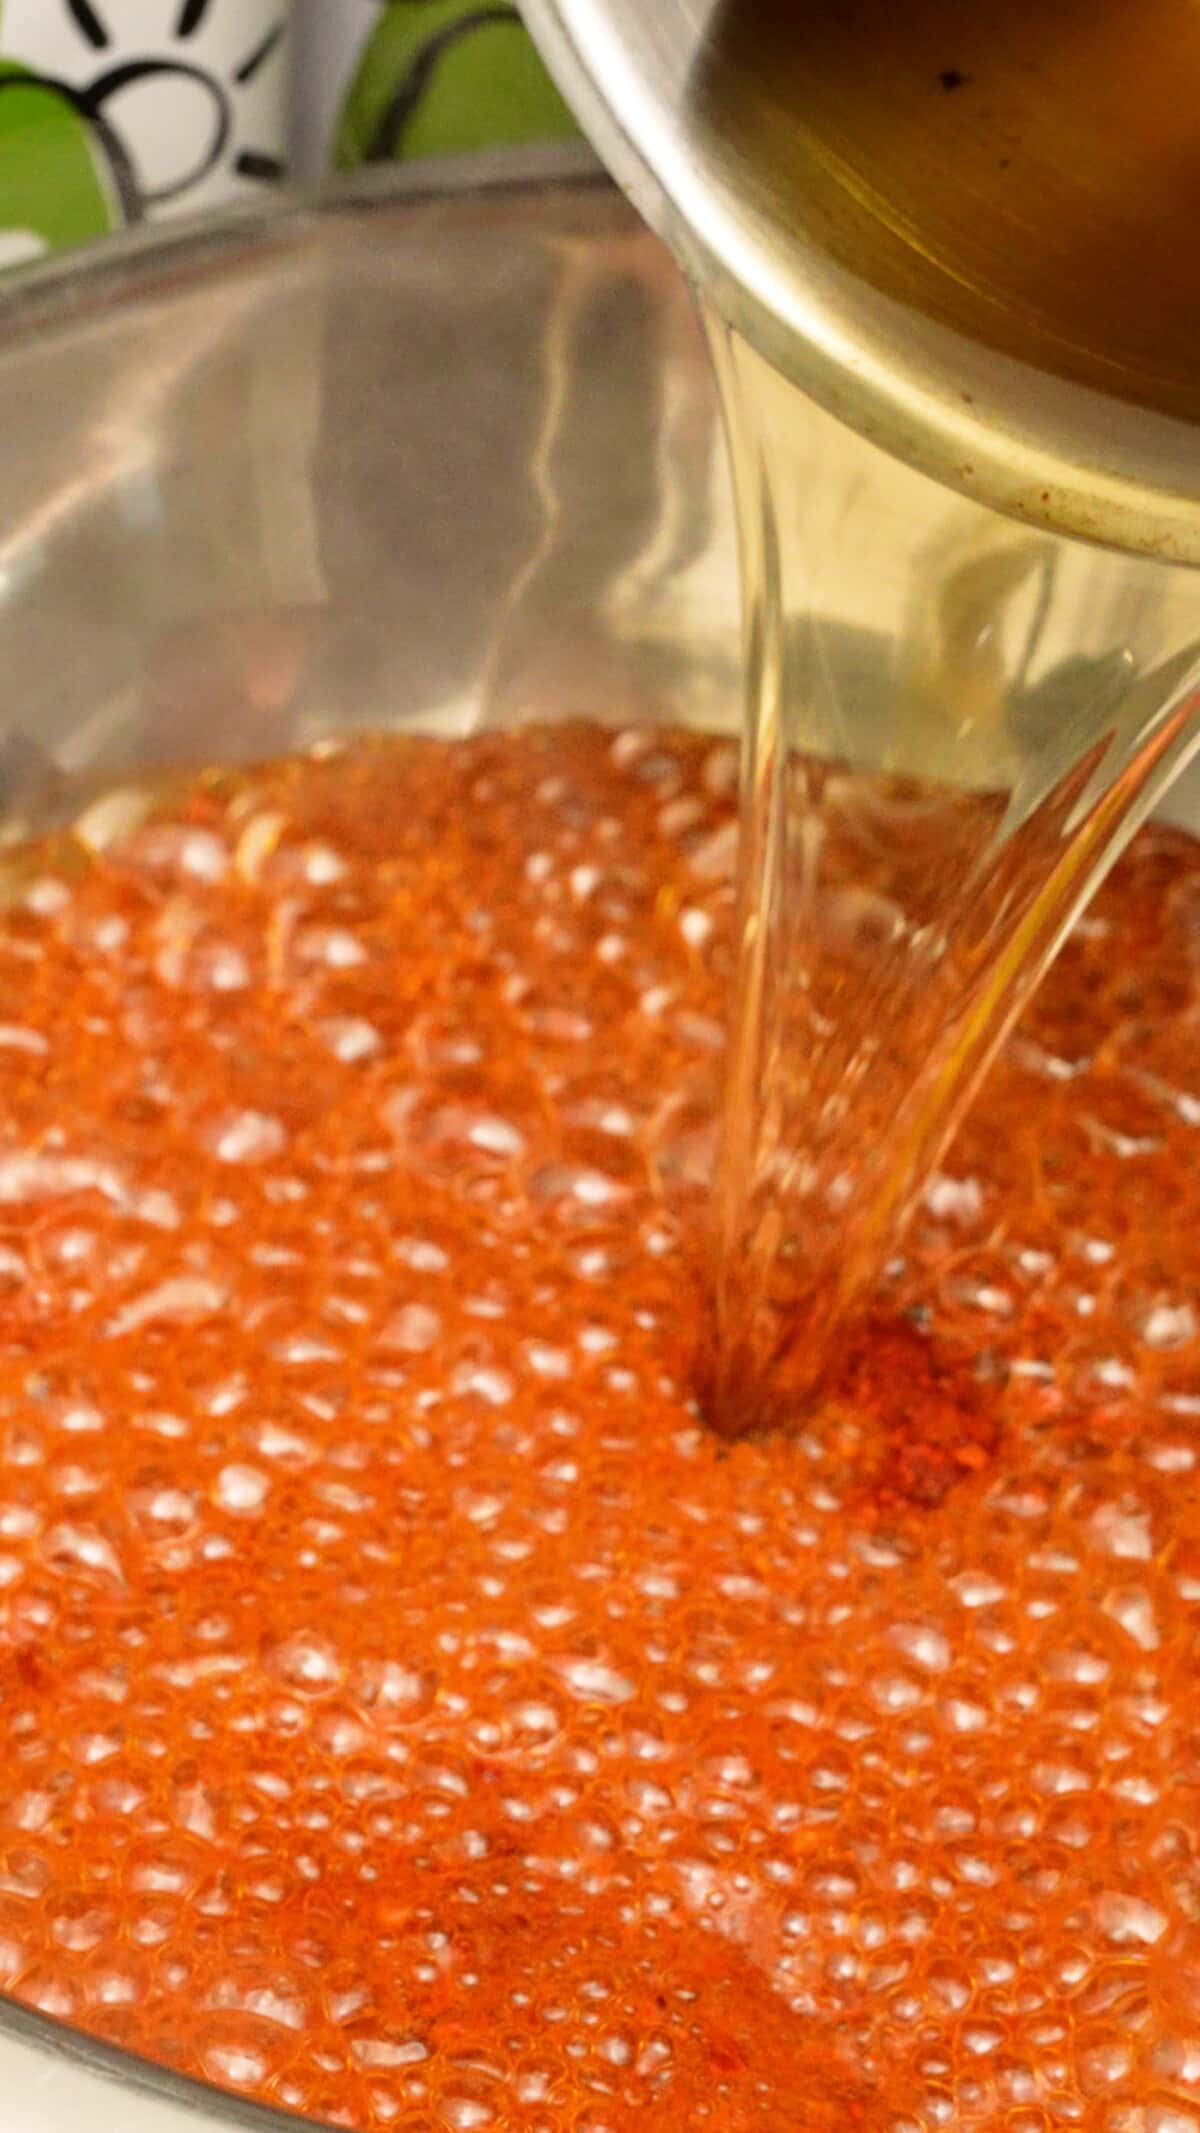 Hot oil being poured over Sichuan chili flakes into a metal bowl.